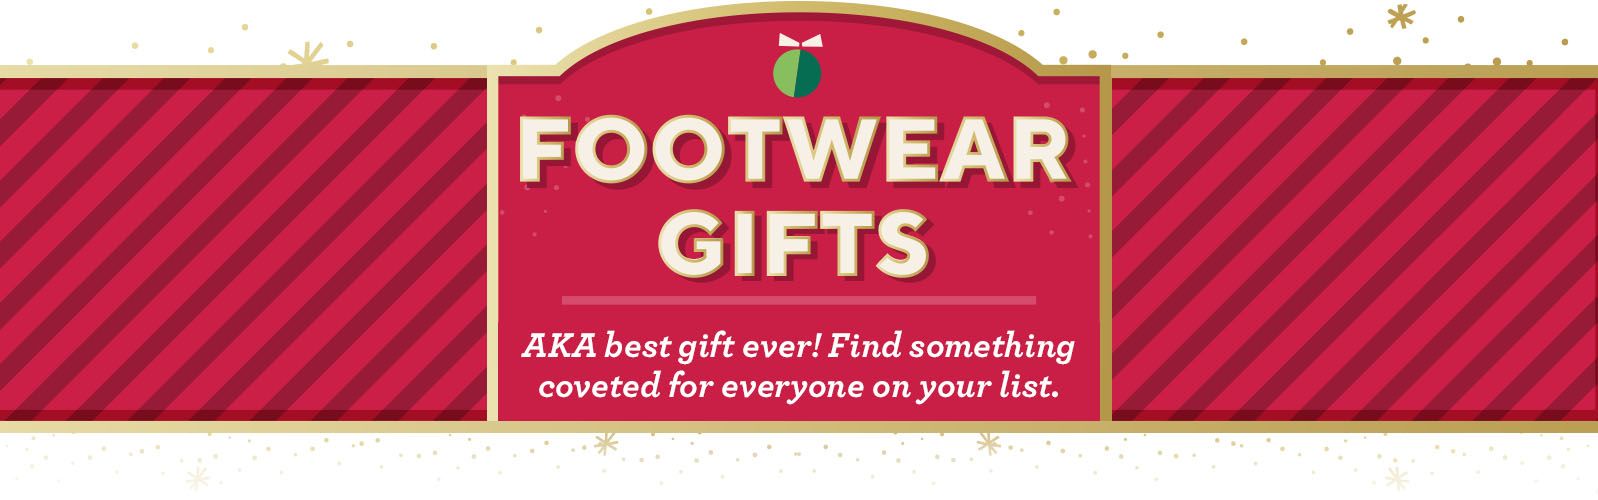 Footwear Gifts. AKA best gift ever! Find something coveted for everyone on your list